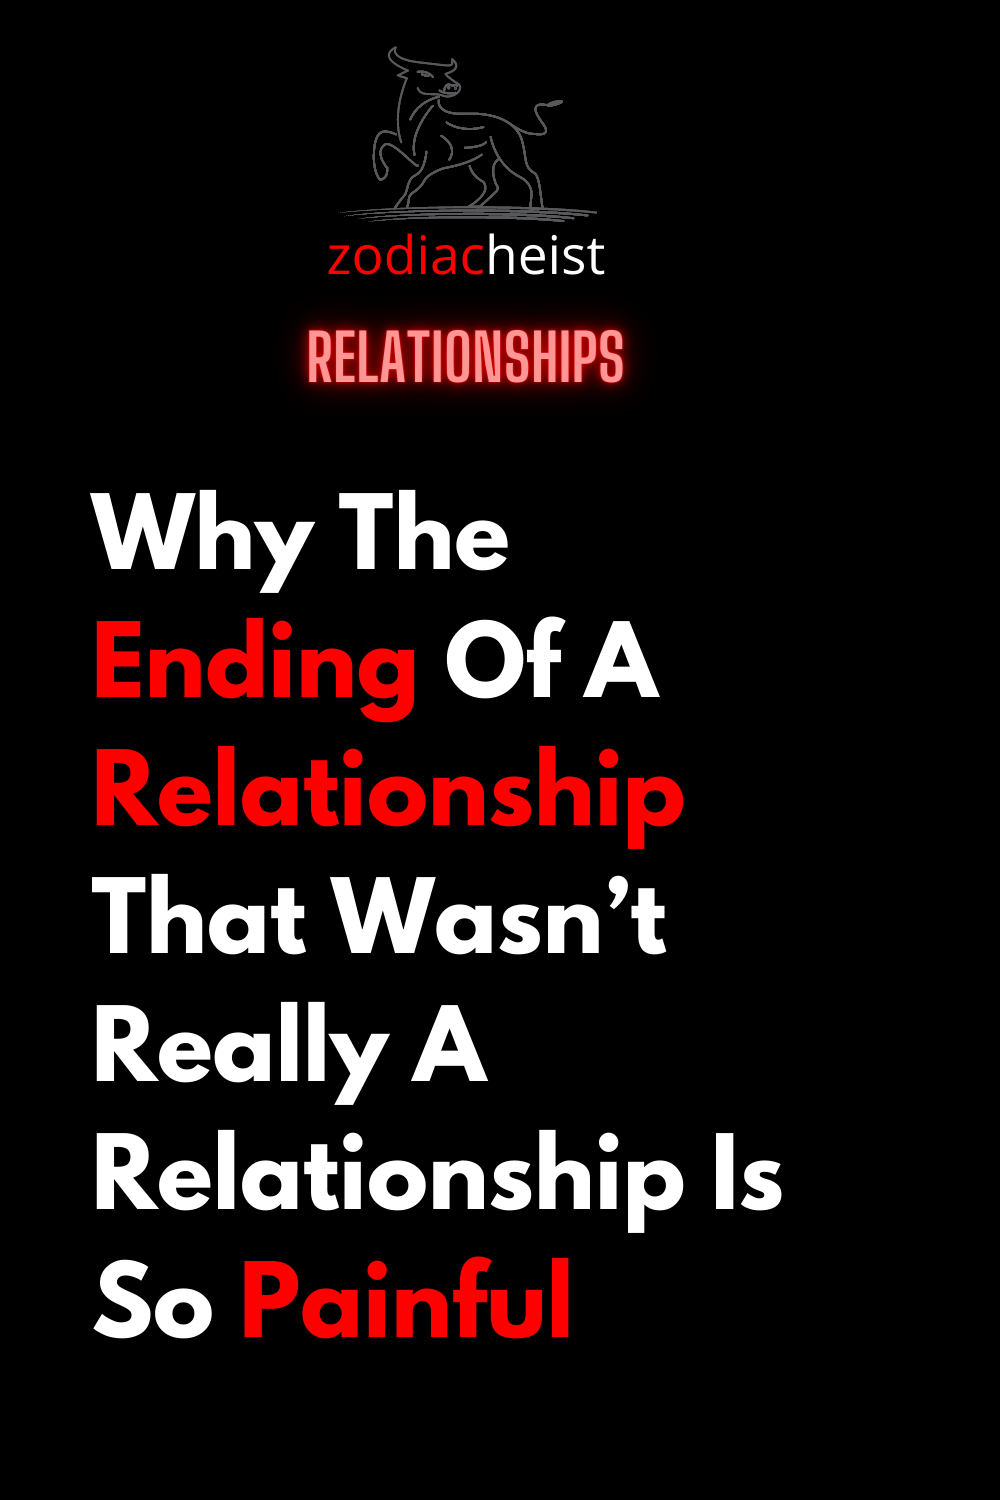 Why The Ending Of A Relationship That Wasn’t Really A Relationship Is So Painful